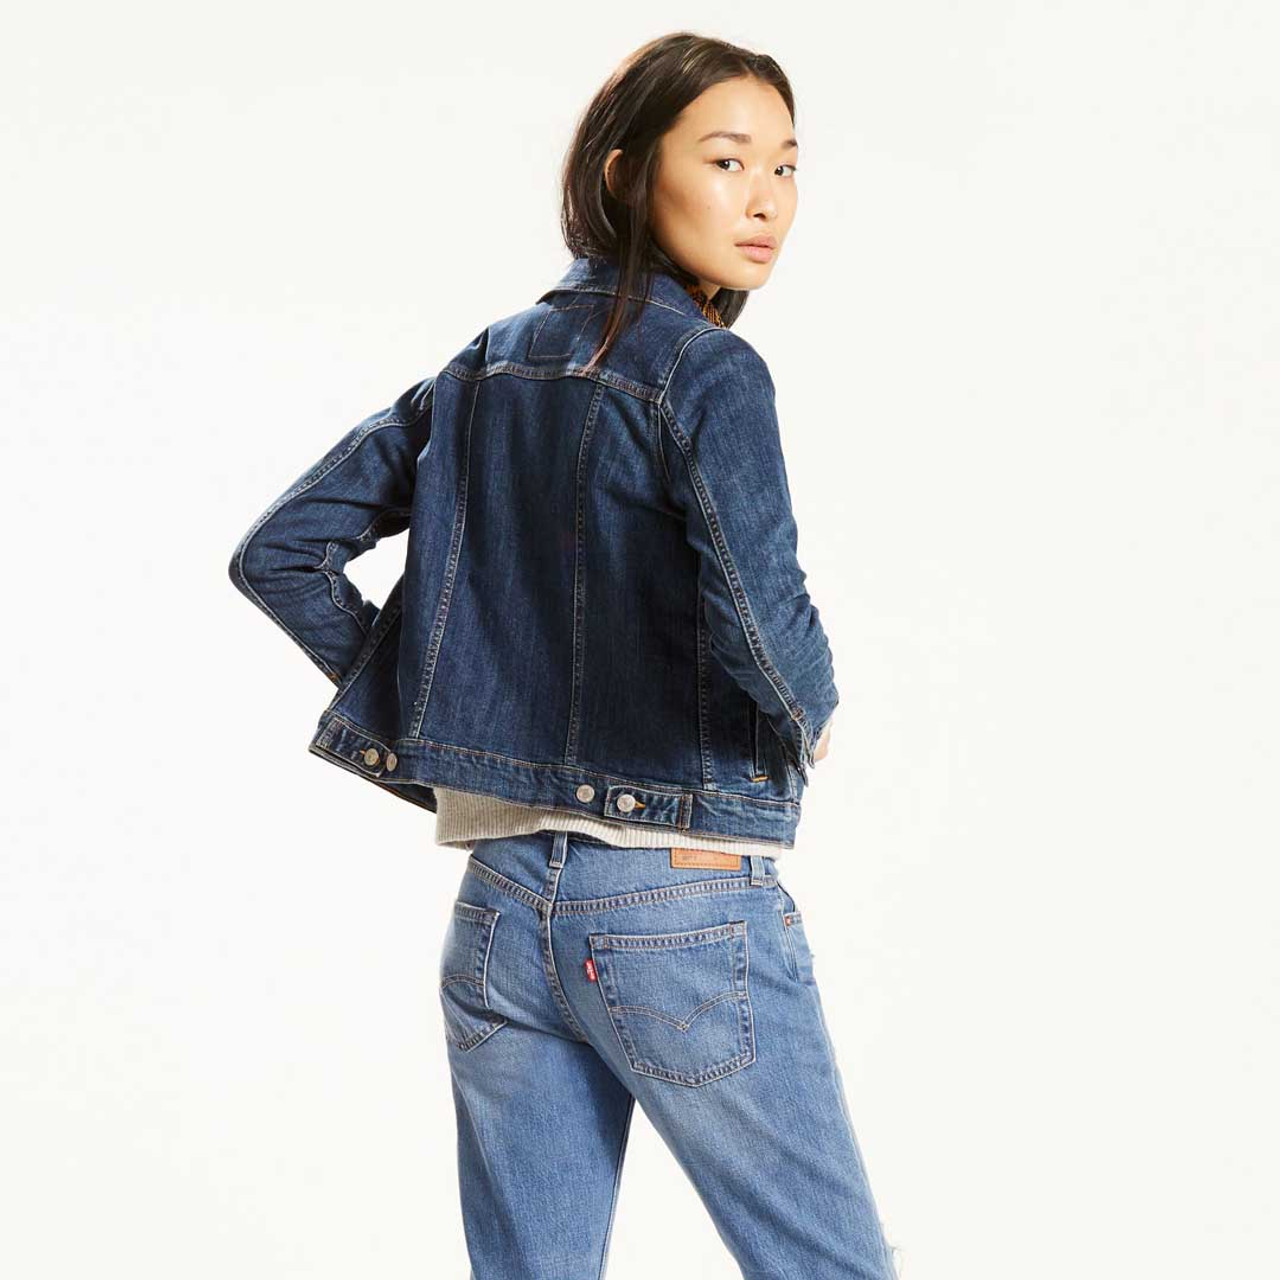 Buy Levi's Women's Red Tab Band Collar Jacket online